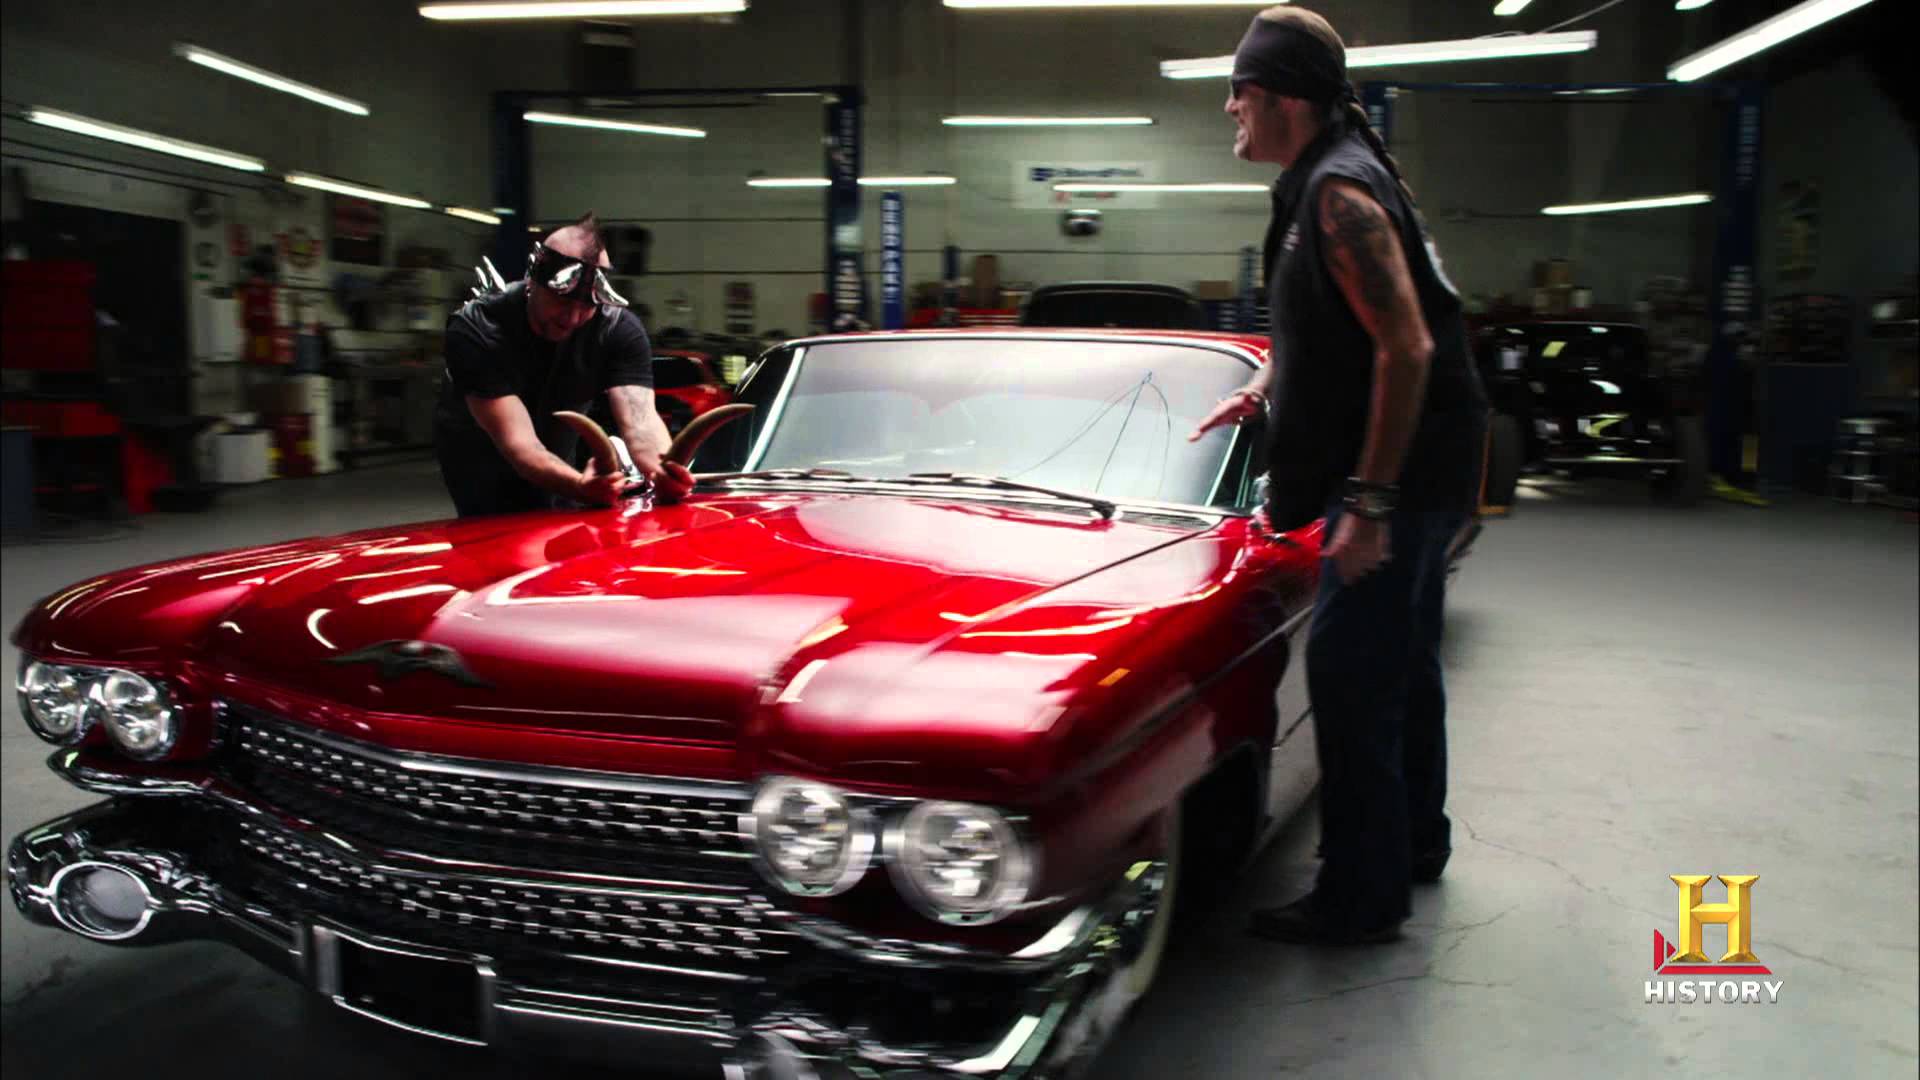 Counting Cars #22